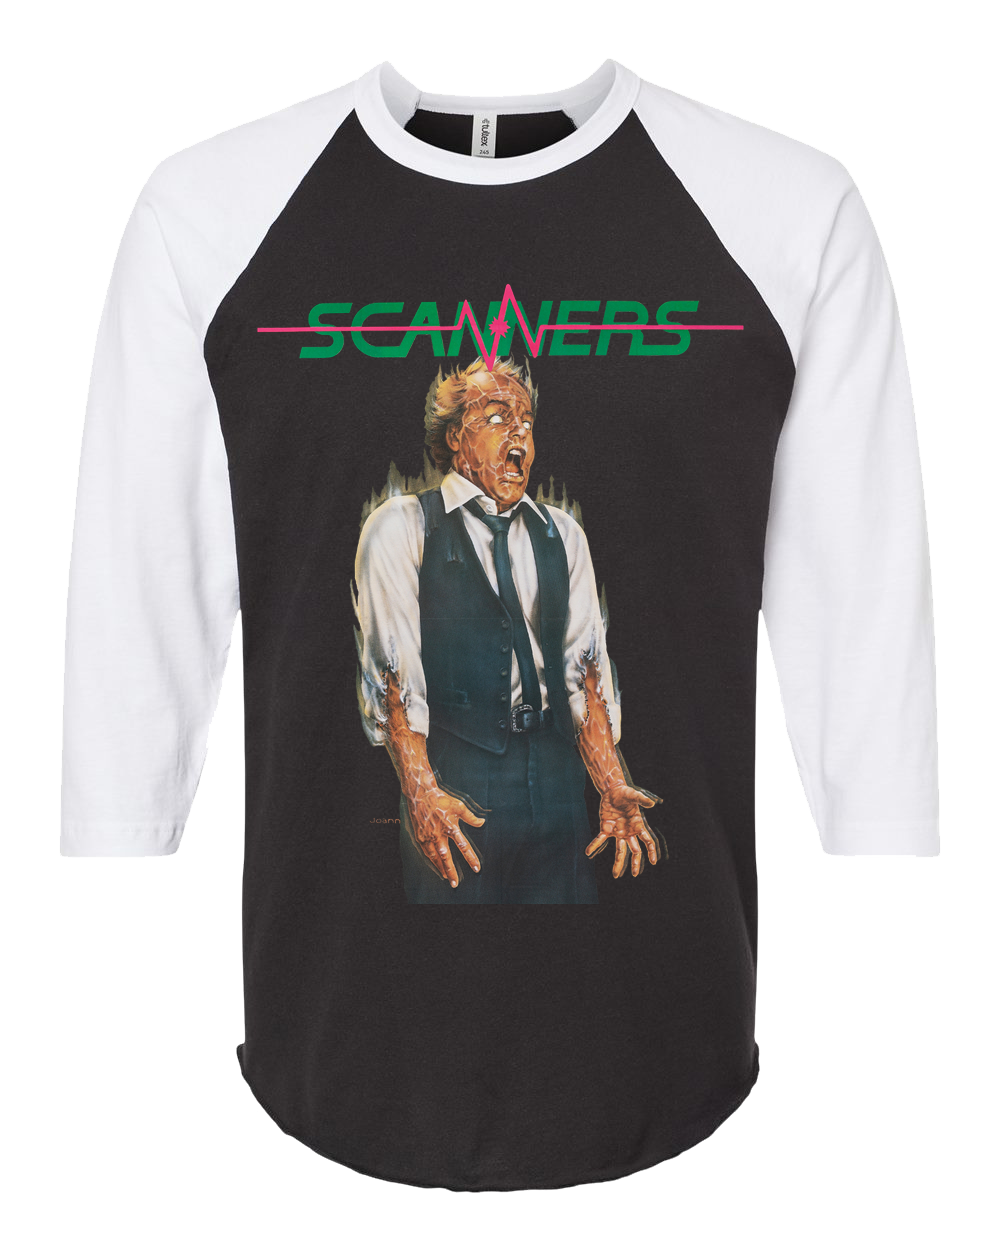 SCANNERS "FRENCH POSTER" 3/4 SLEEVE RAGLAN WHITE SLEEVES